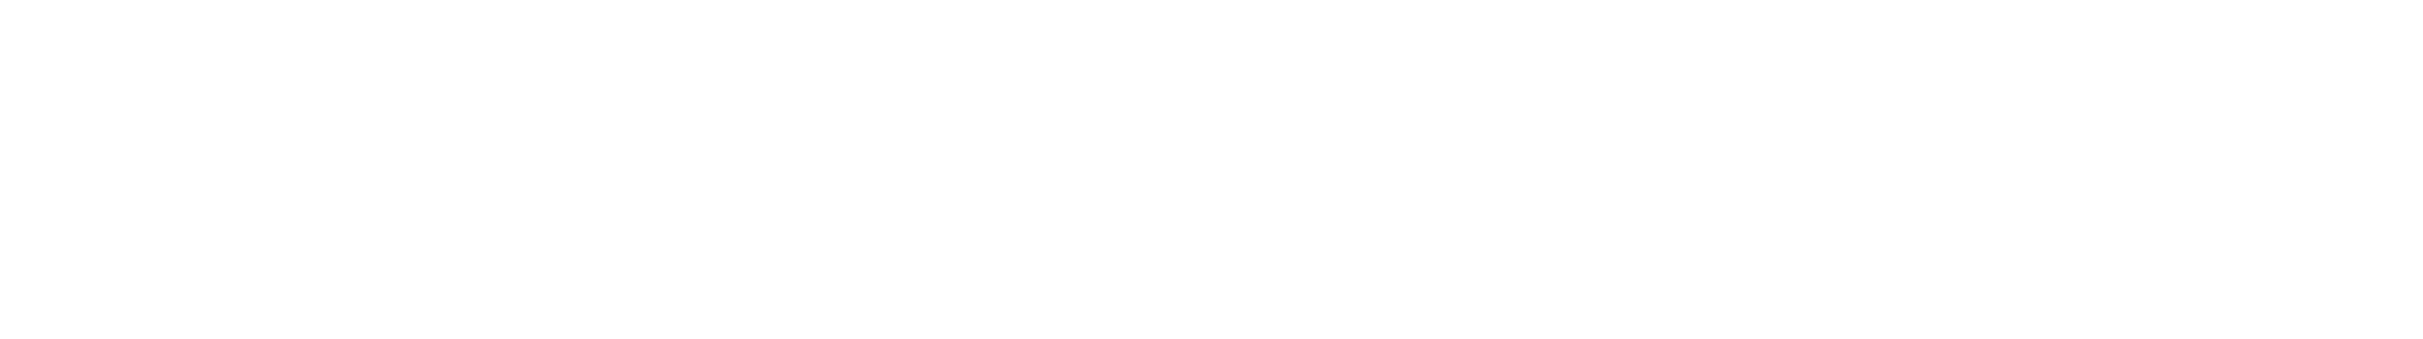 Mississippi State University Off-Campus Housing Marketplace